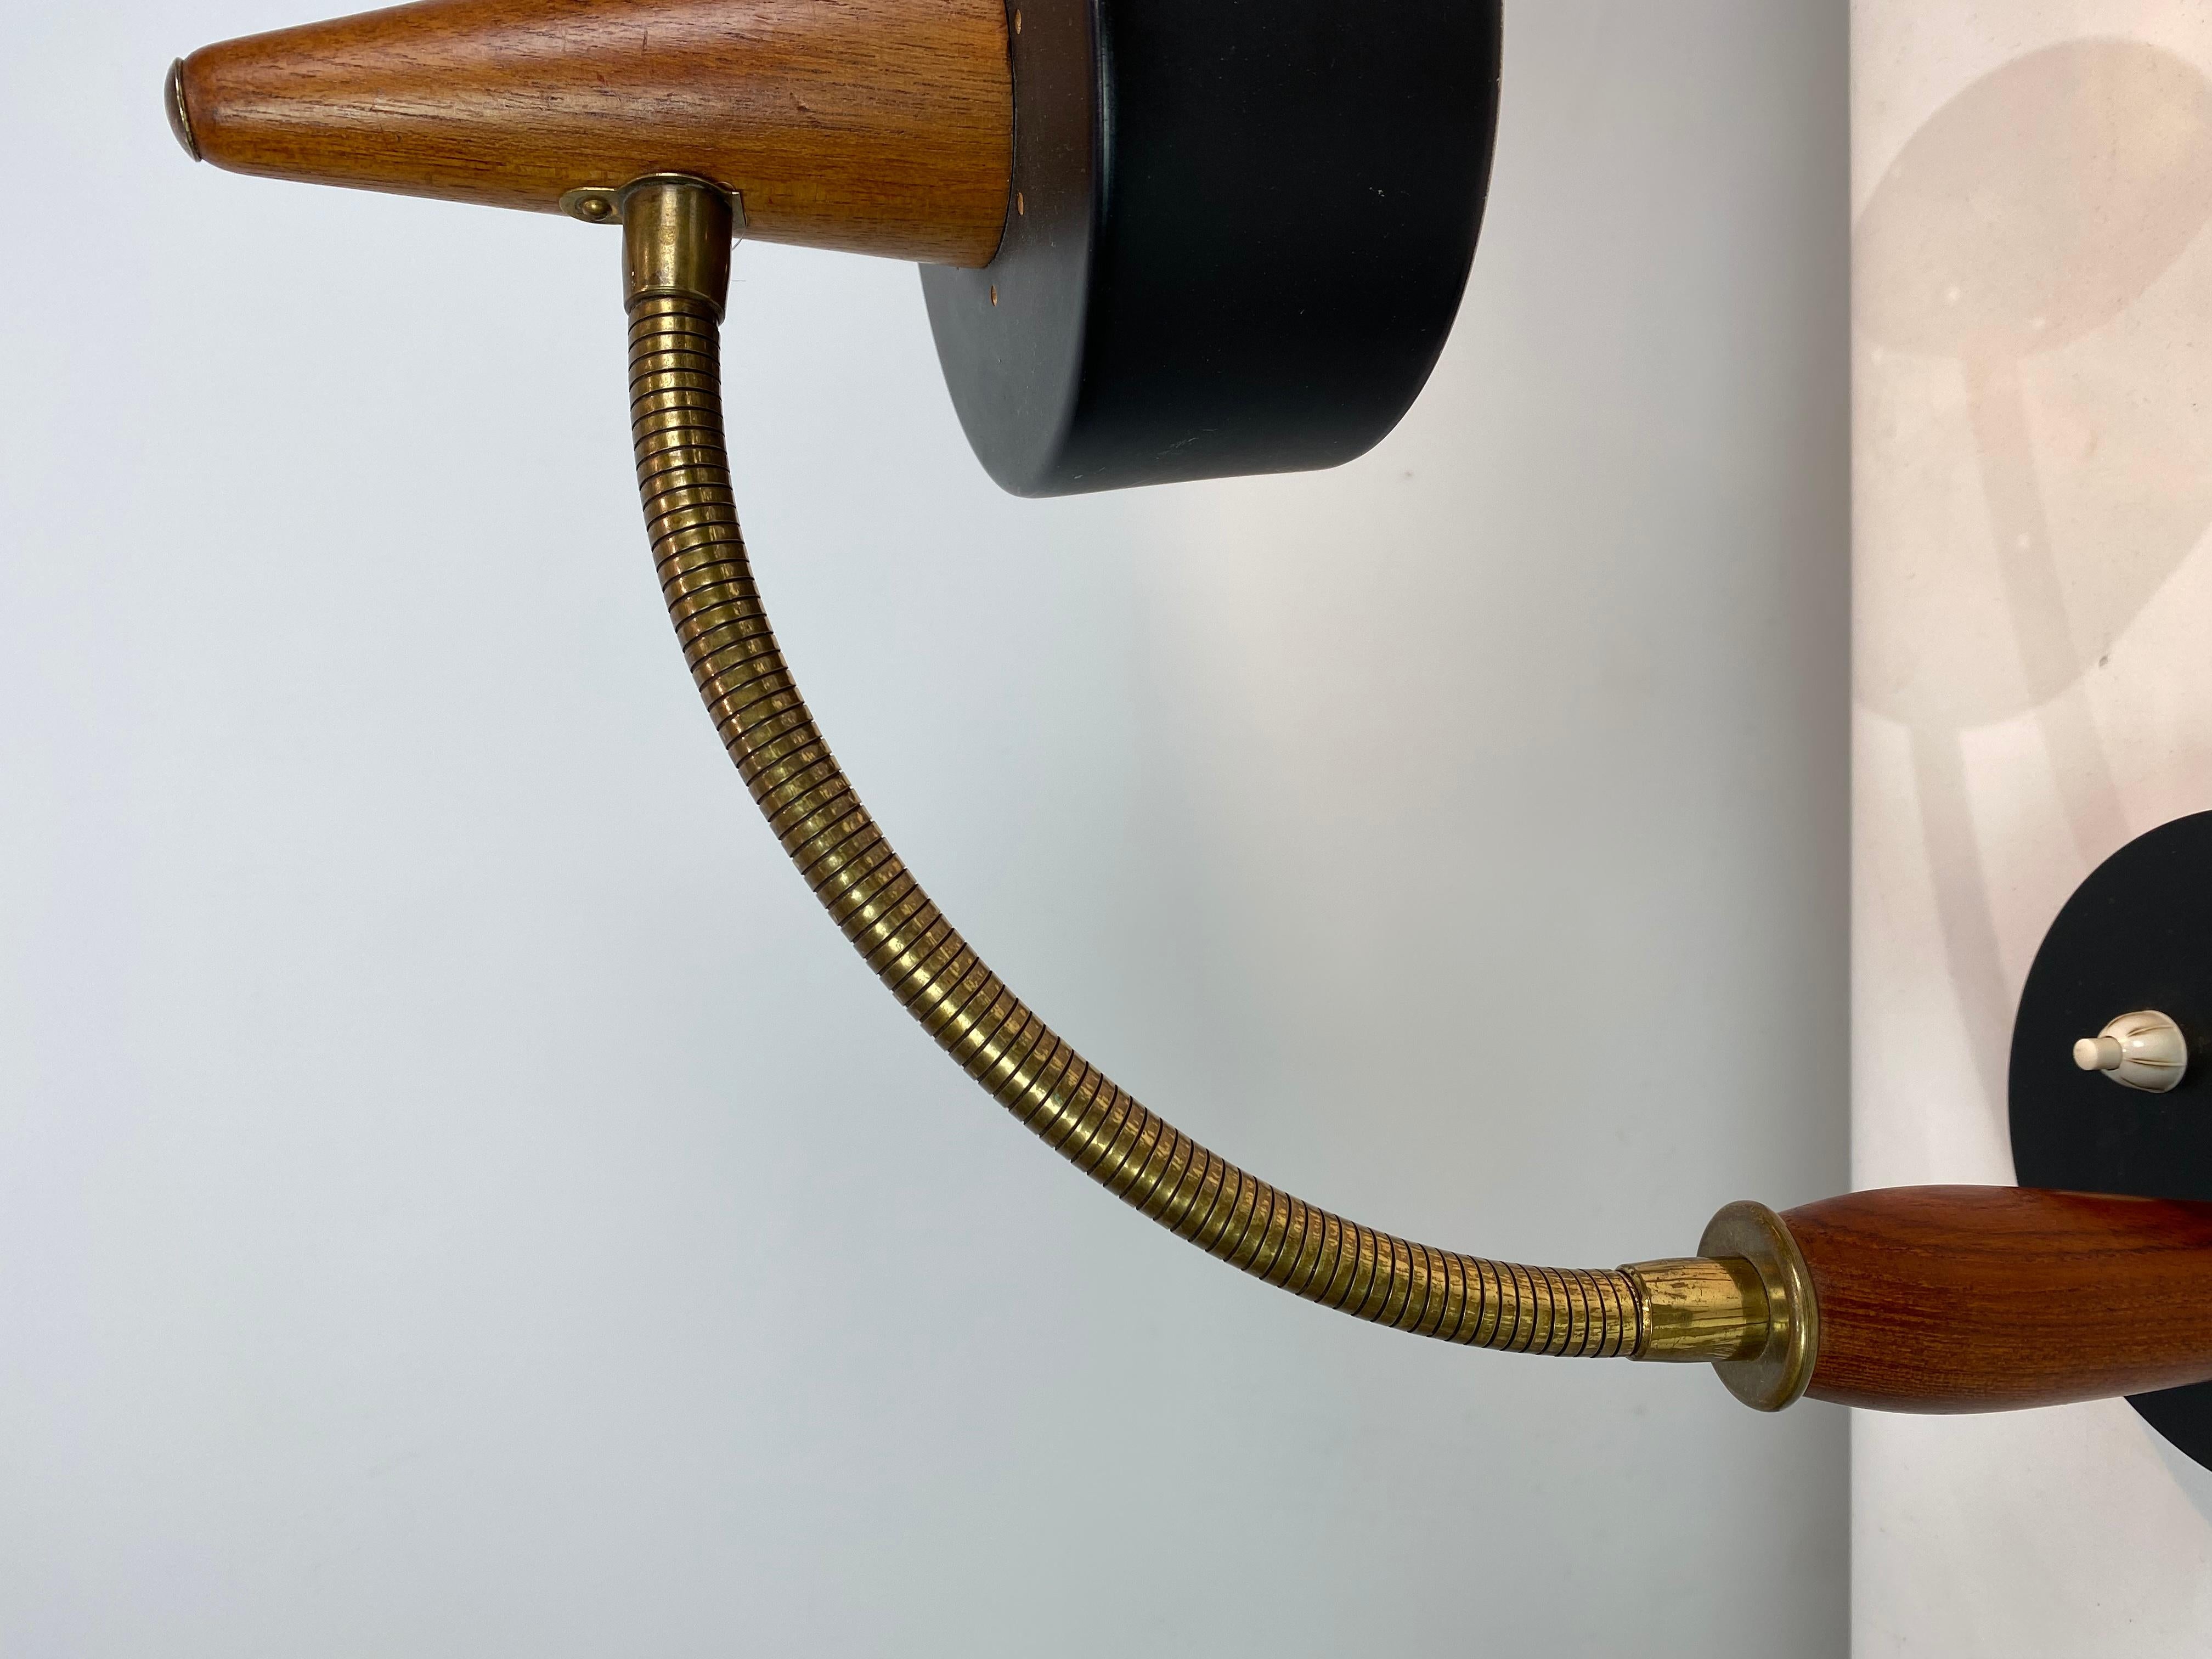 Scandinavian Modern Table Lamp of Black Metal and Teak of Danish Design from the 1960s For Sale